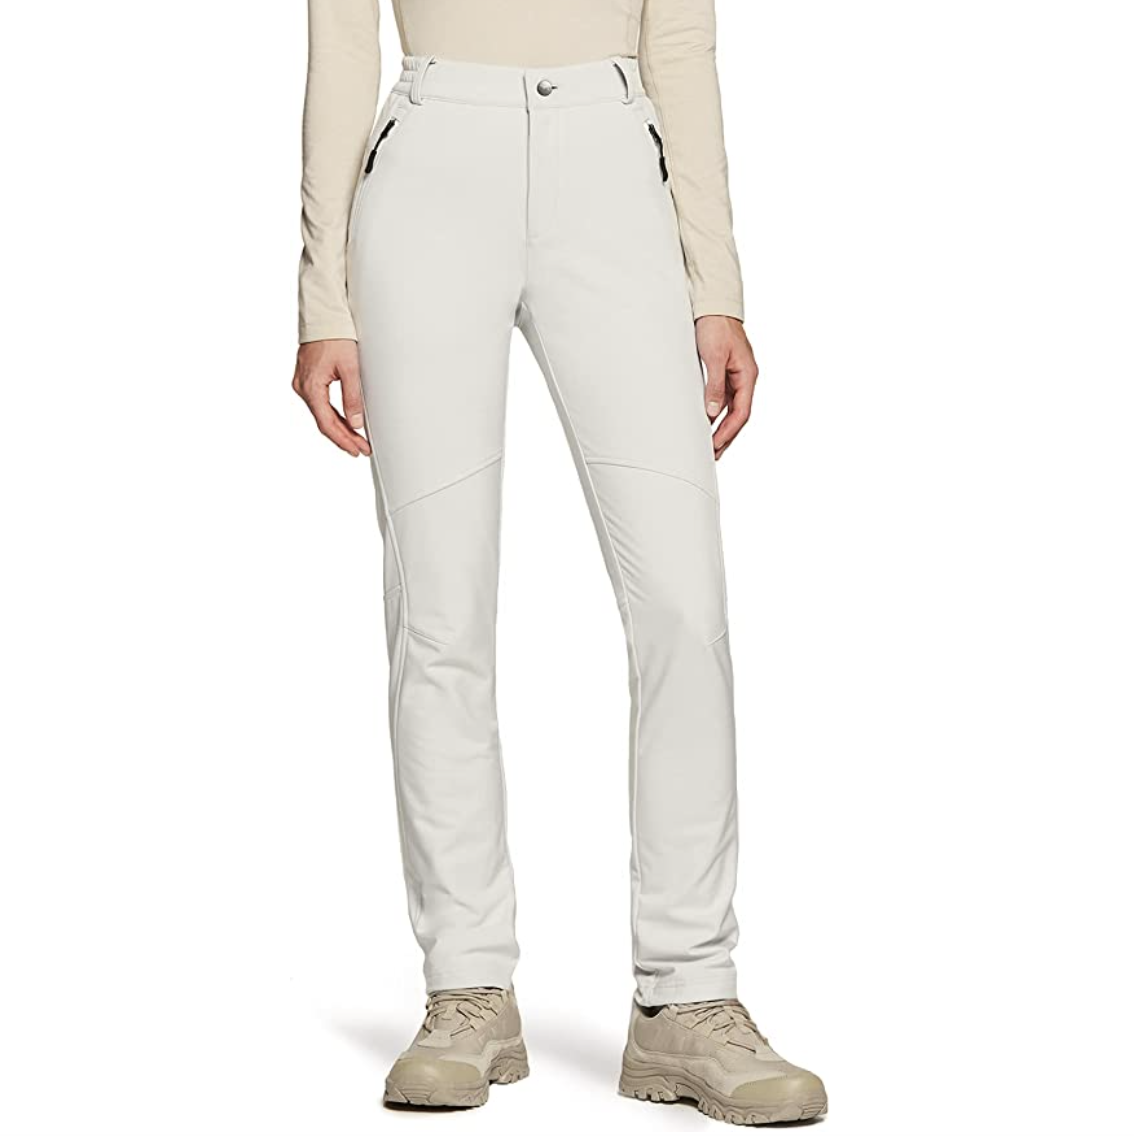 Best womens ski pants of 20192020 Waterproof and insulated salopettes  for the new season  The Independent